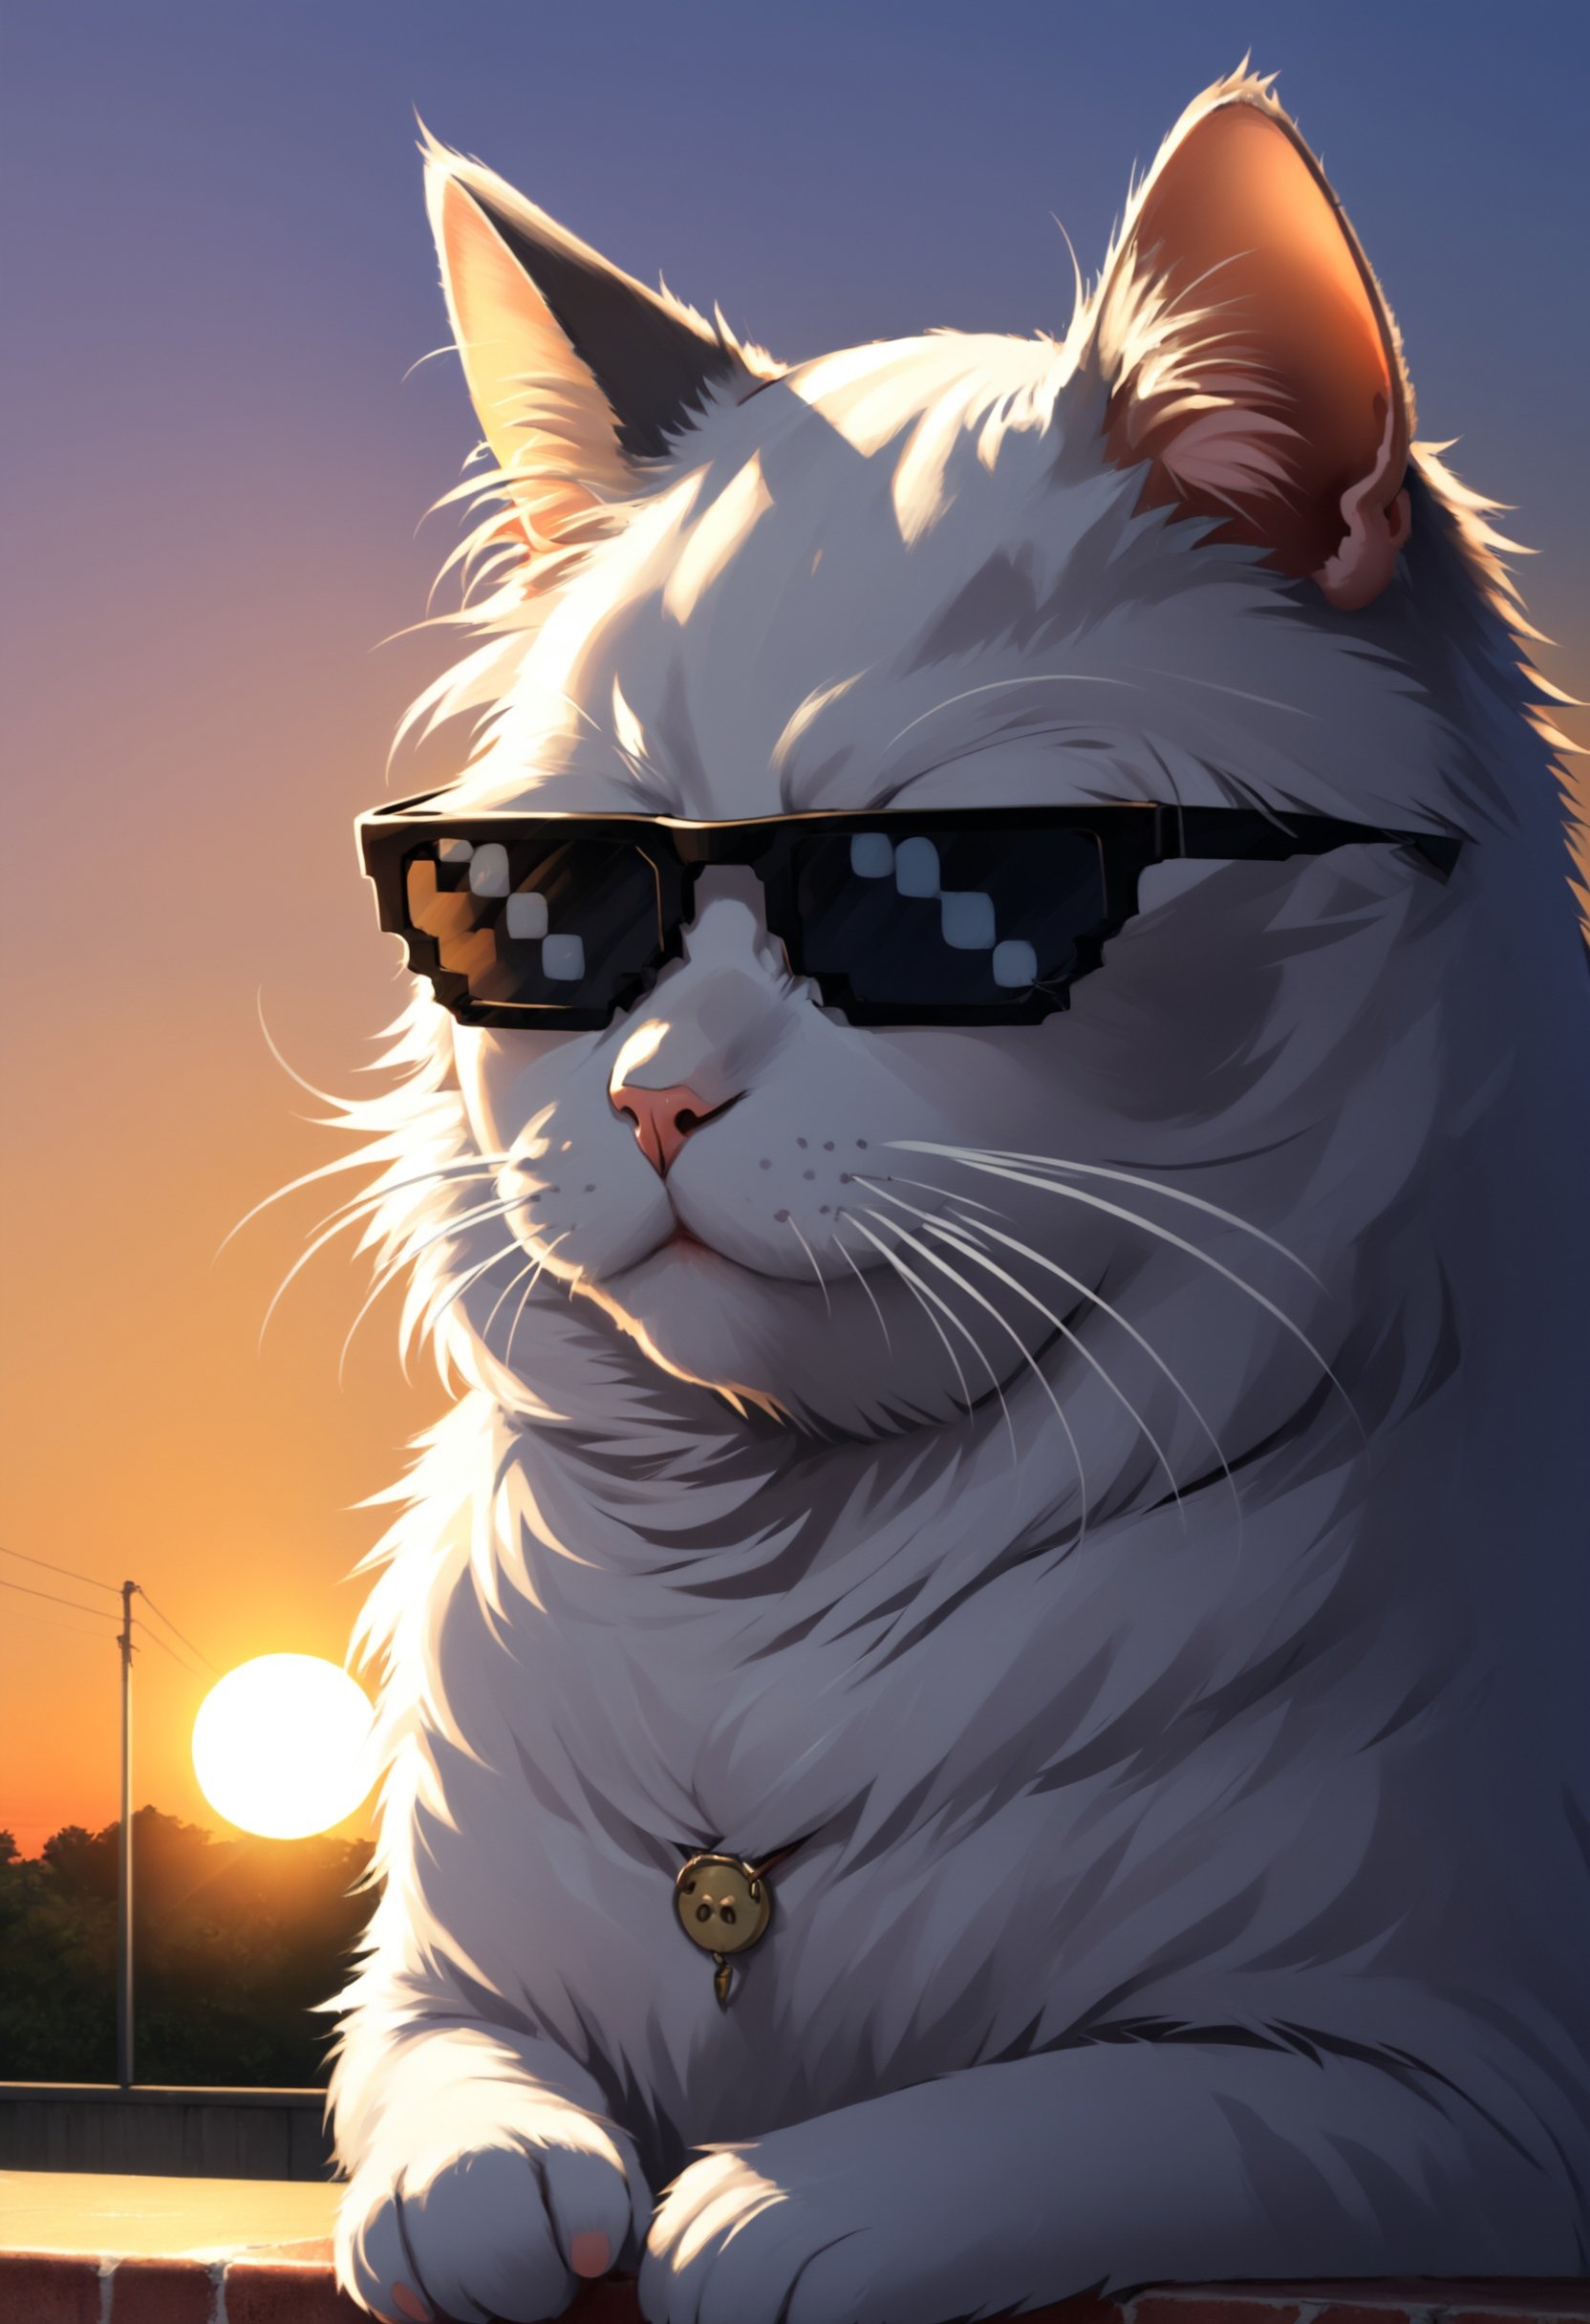 IncrsXLDealWithIt,sunglasses, anime, cat, watching mouse, afternoon, dusk, Bokeh, smug,